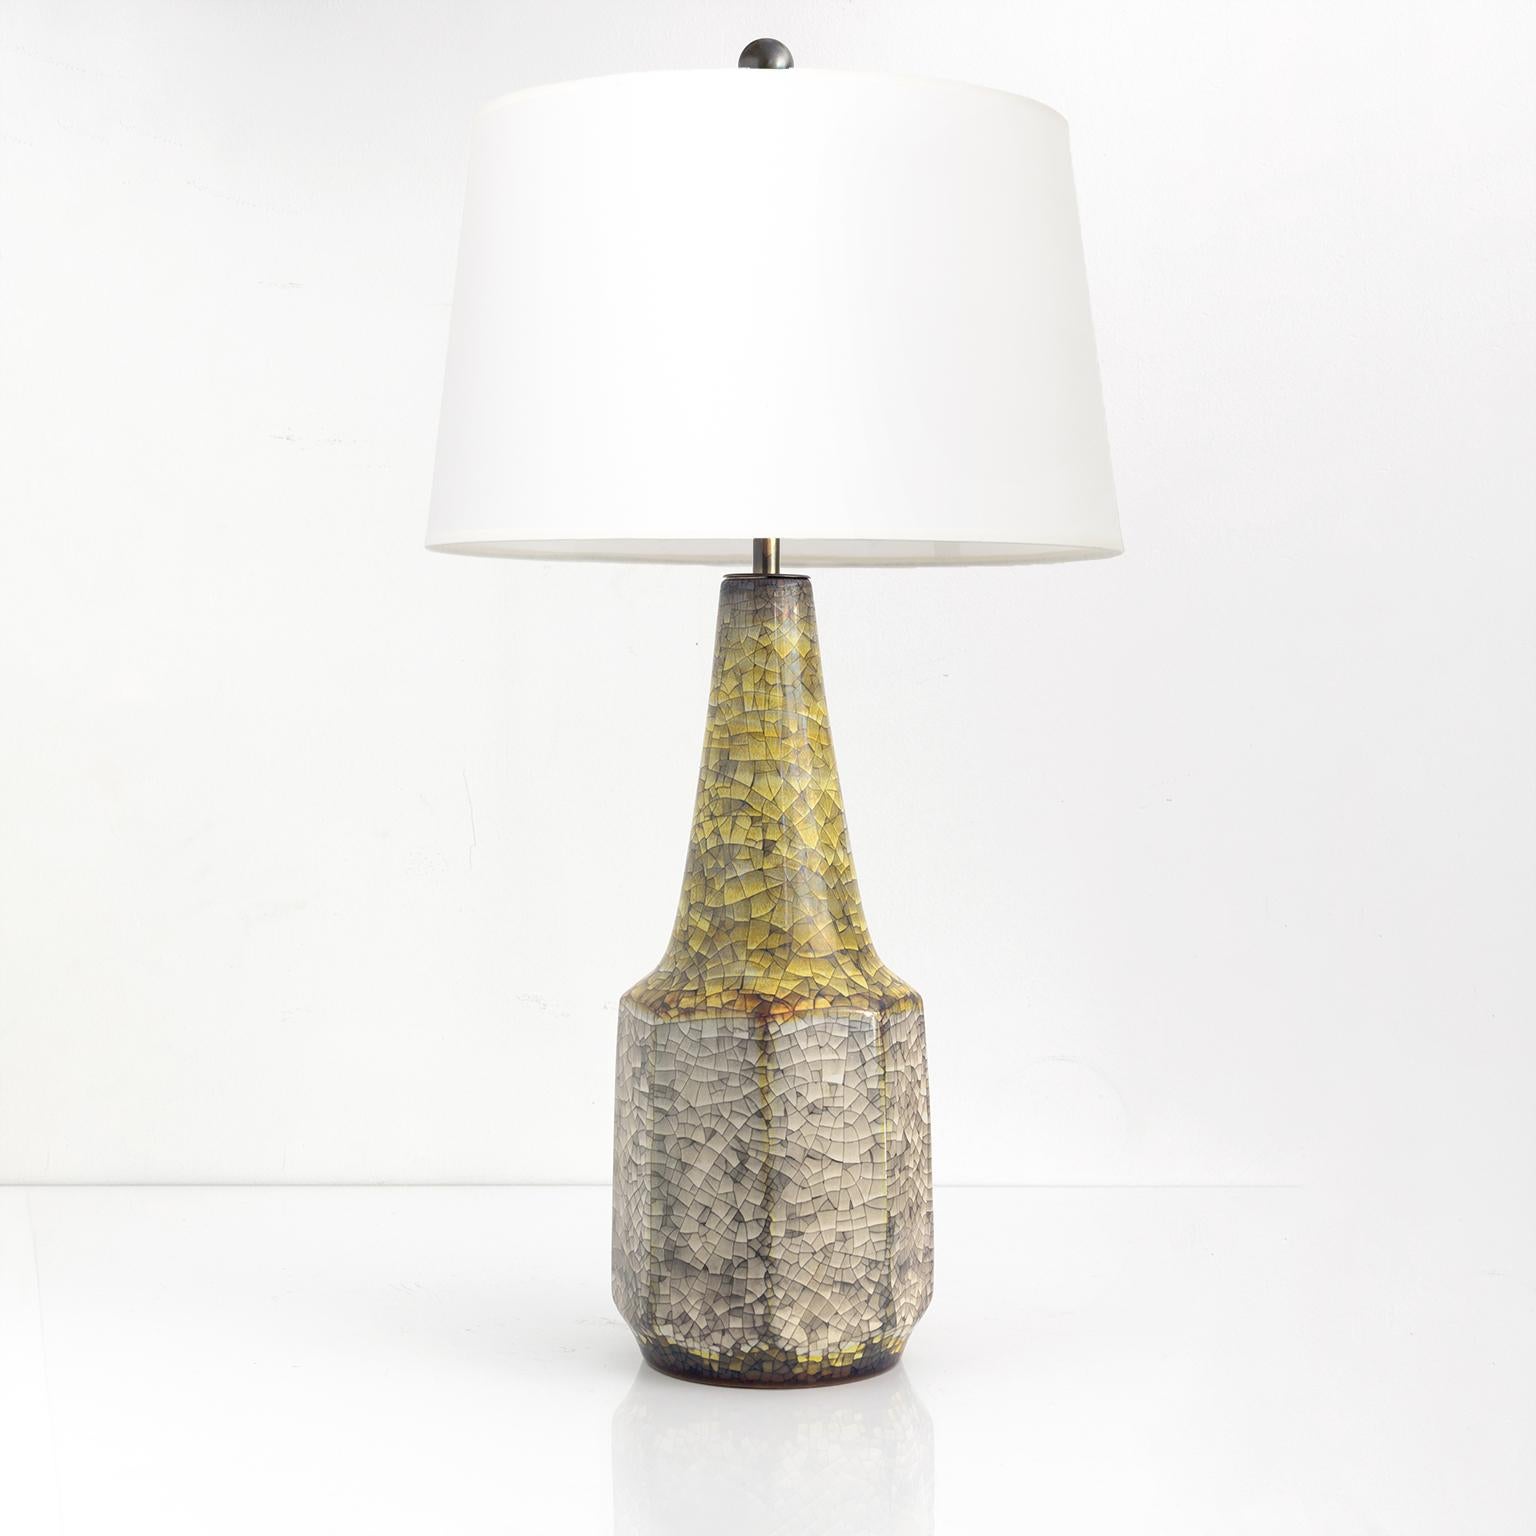 Michael Andersen & Son beautifully colored crackle glazed lamp, with conical neck emerging from an octagonal base. The lamp has newly created custom patinated brass hardware which includes: the stem, “S” form cluster with candelabra sockets and a